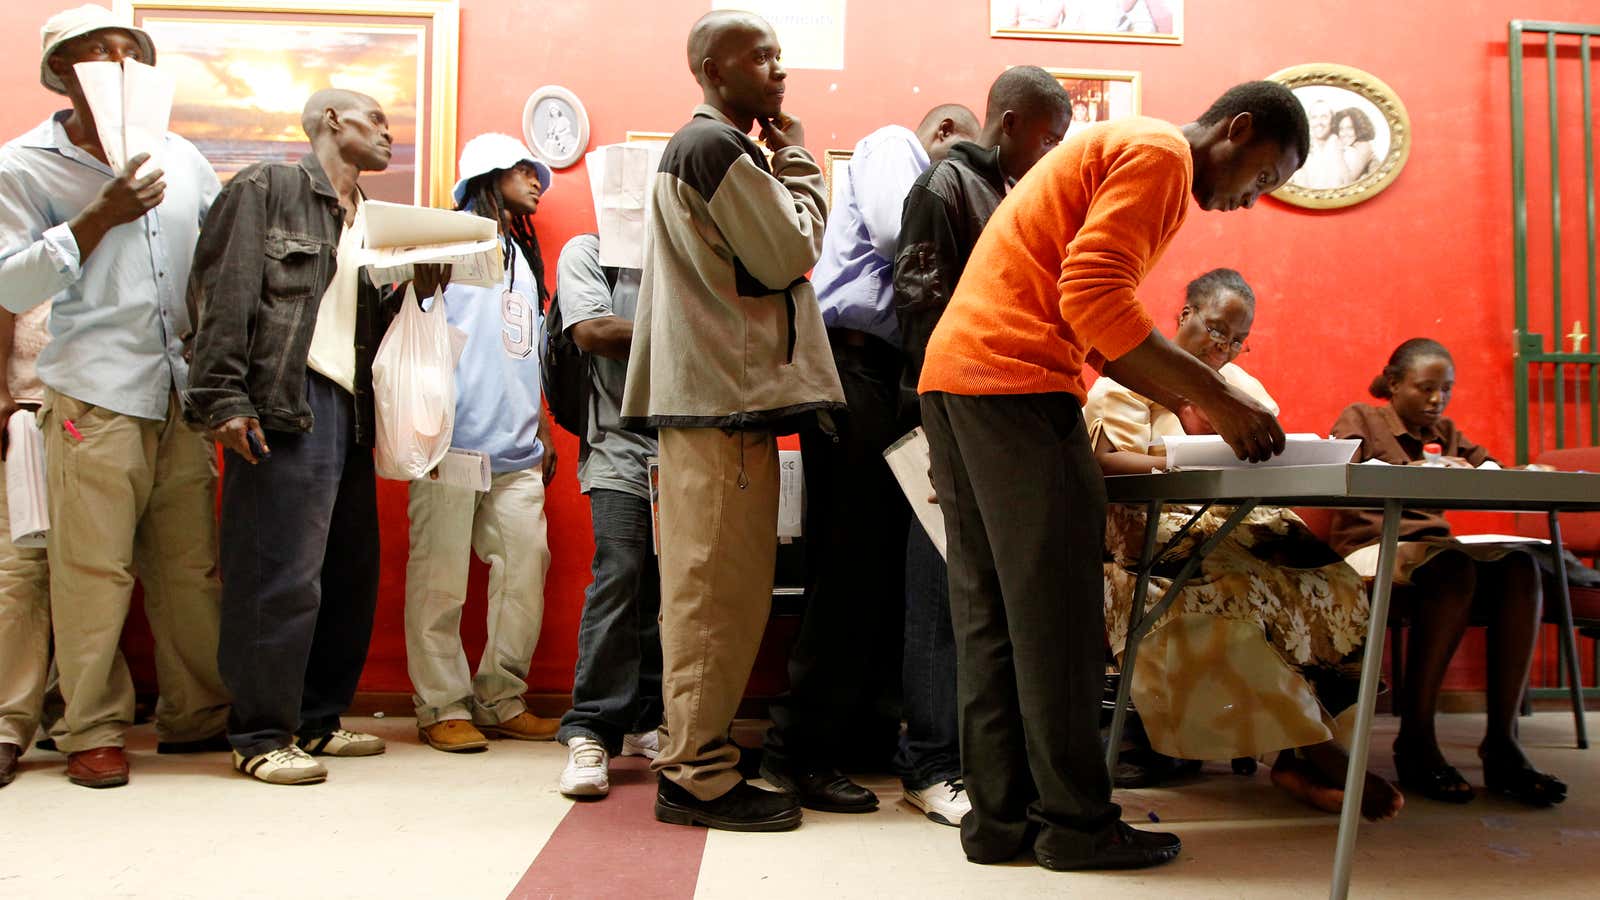 Zimbabweans queue to apply for residence permits in Cape Town.